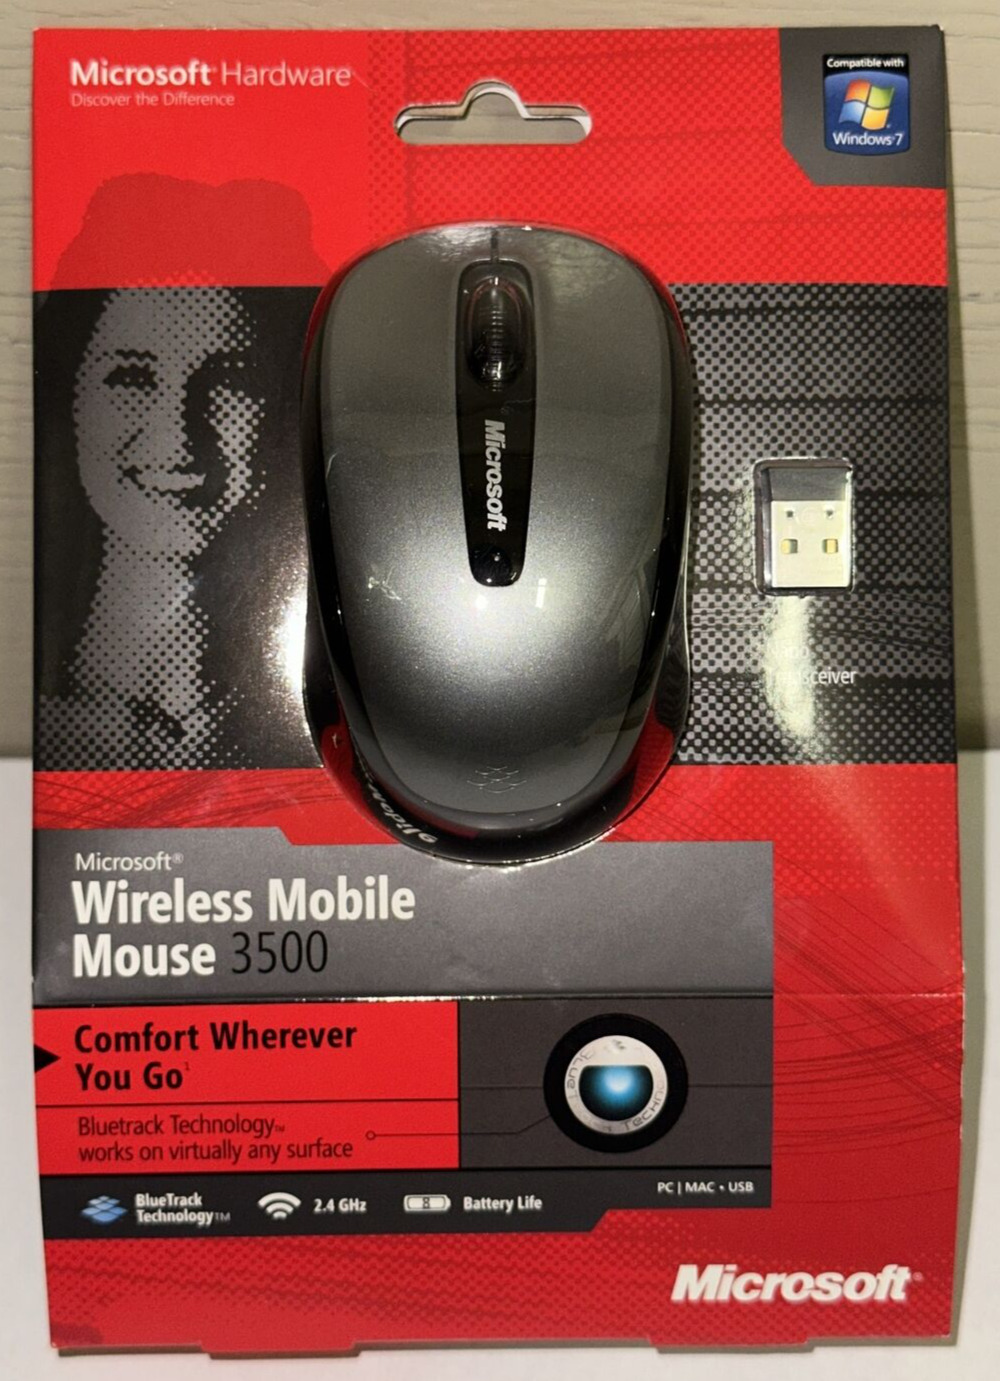 Microsoft Wireless Mobile 3500 Mouse SILVER GRAY Bluetrack USB Technology Sealed